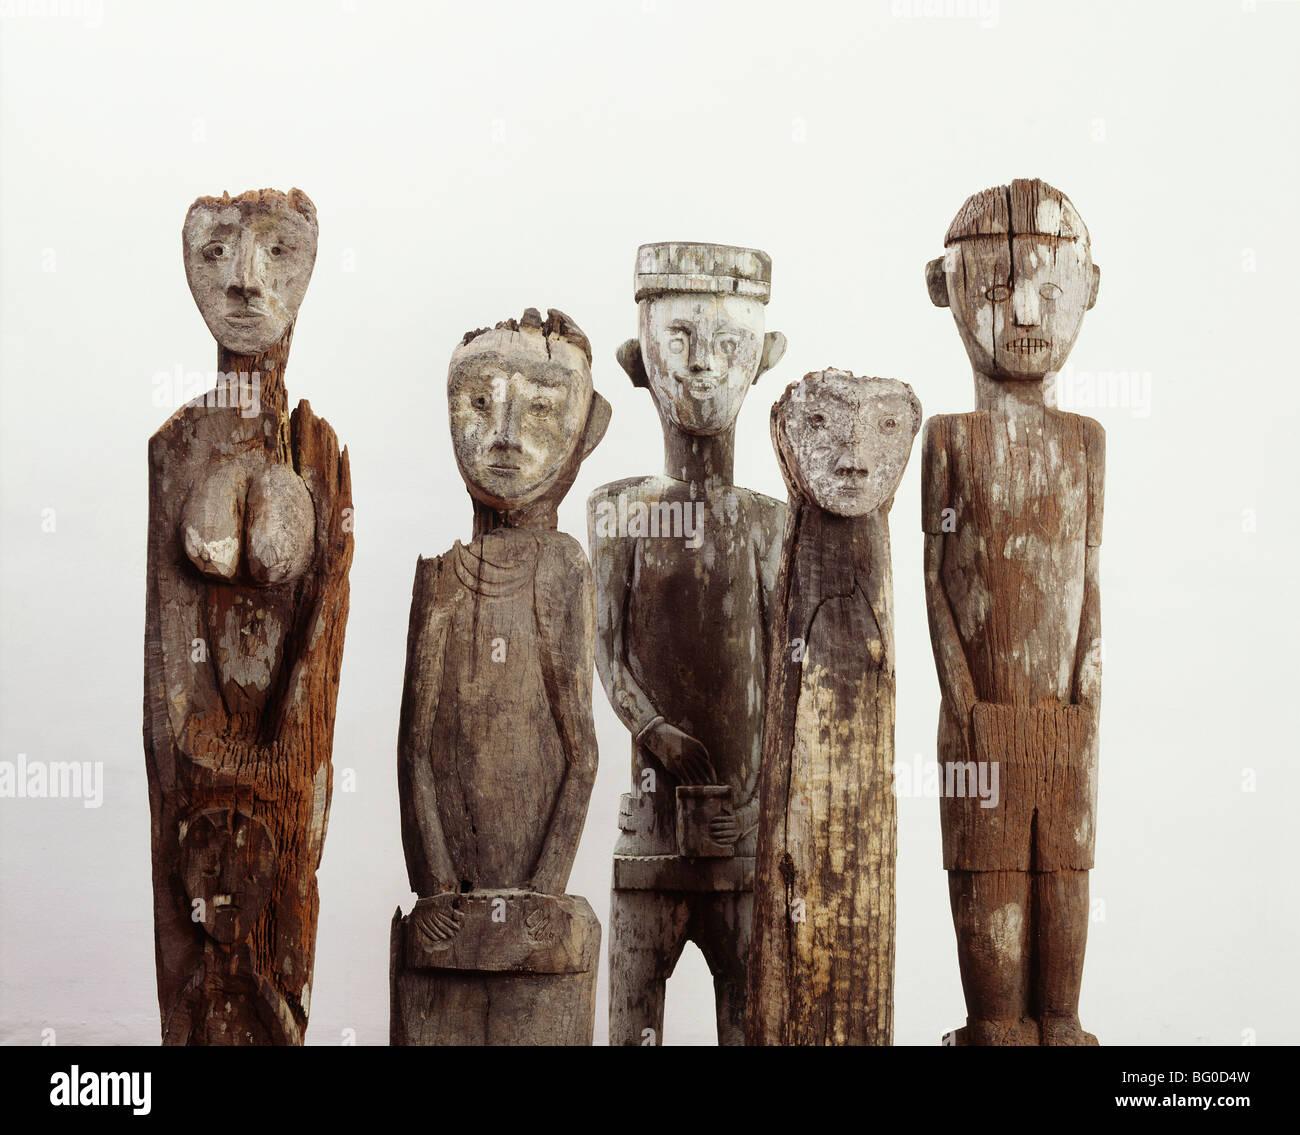 Guardian figures carved in wood, found near  villages for protection from evil spirits, Sarawak, Borneo, Malaysia Stock Photo